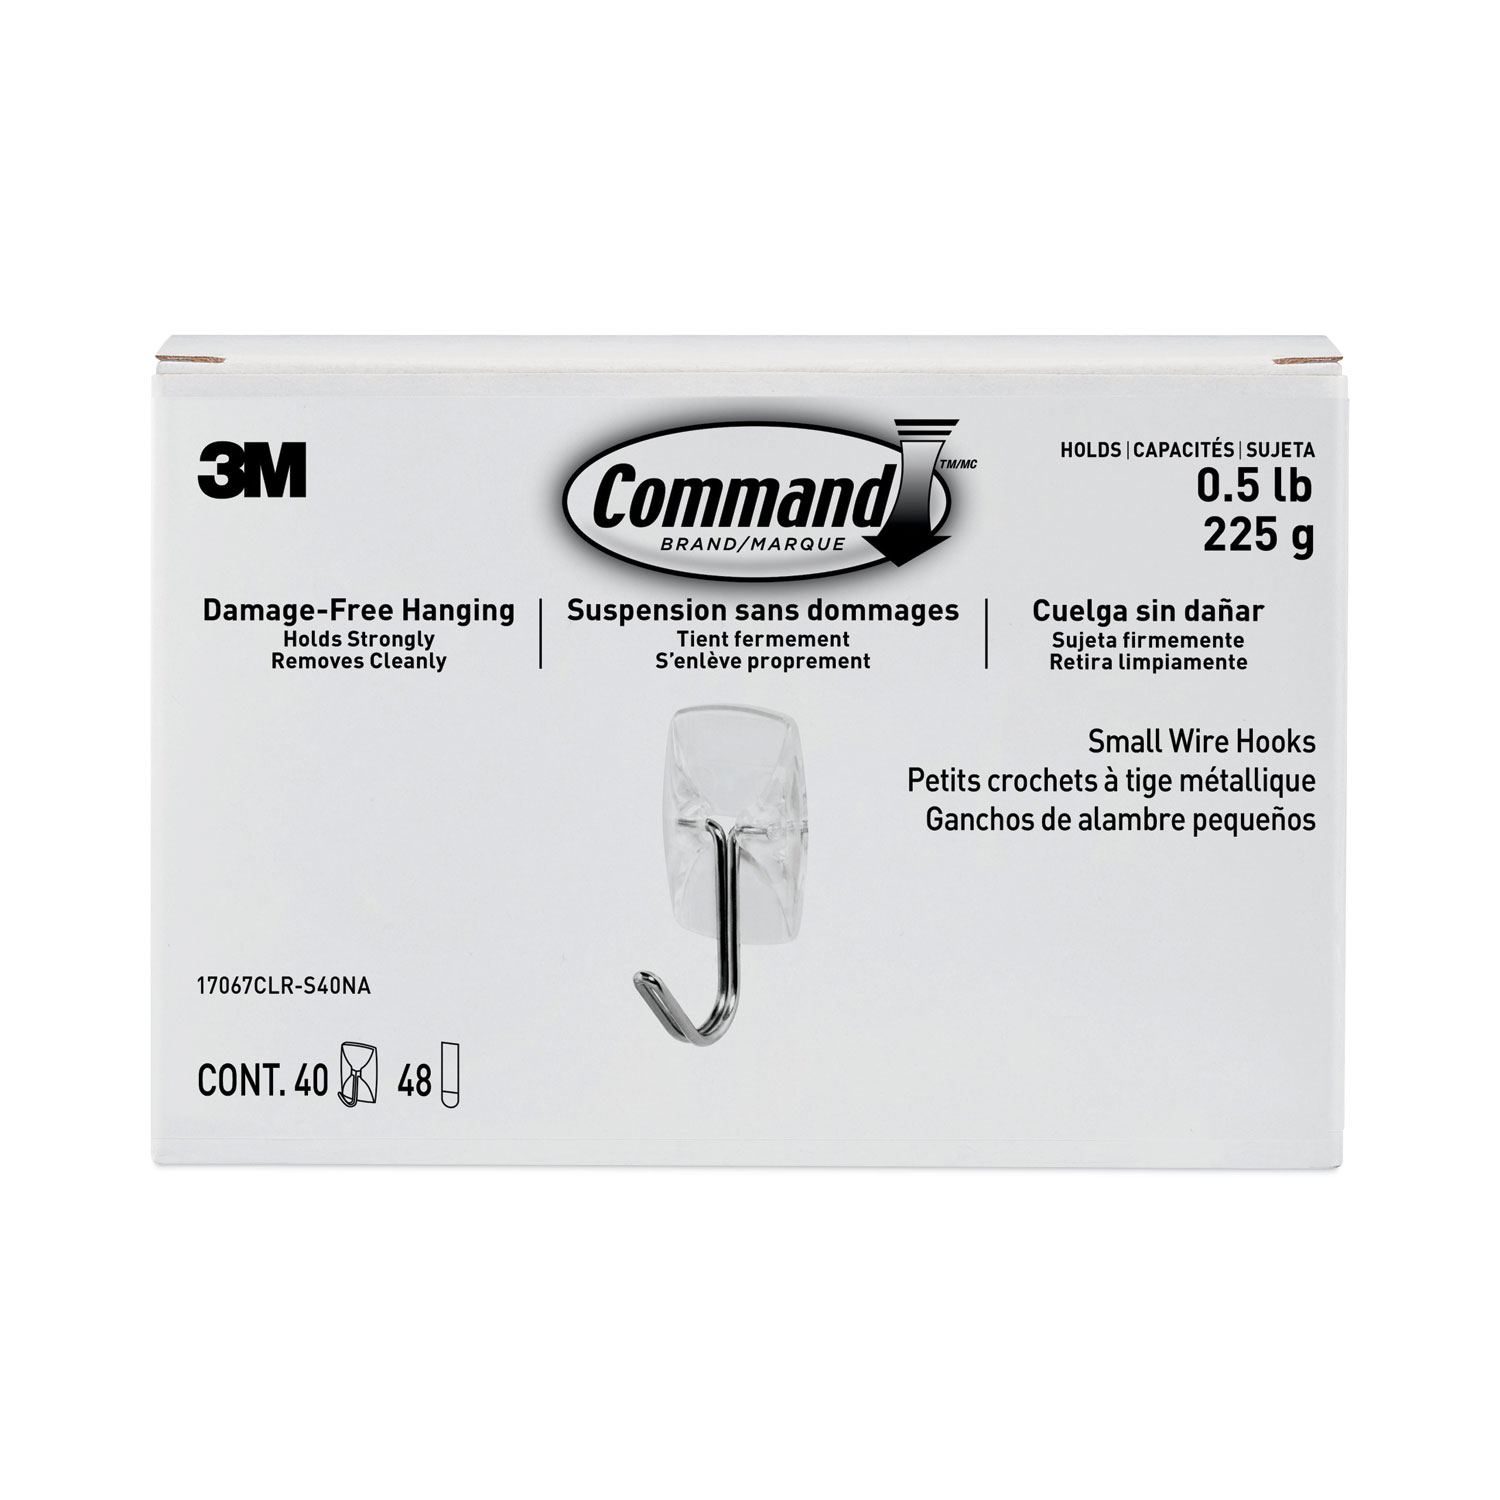 Command Mini Wall Hooks, Clear, Damage Free Decorating, Six Hooks and Eight  Command Strips